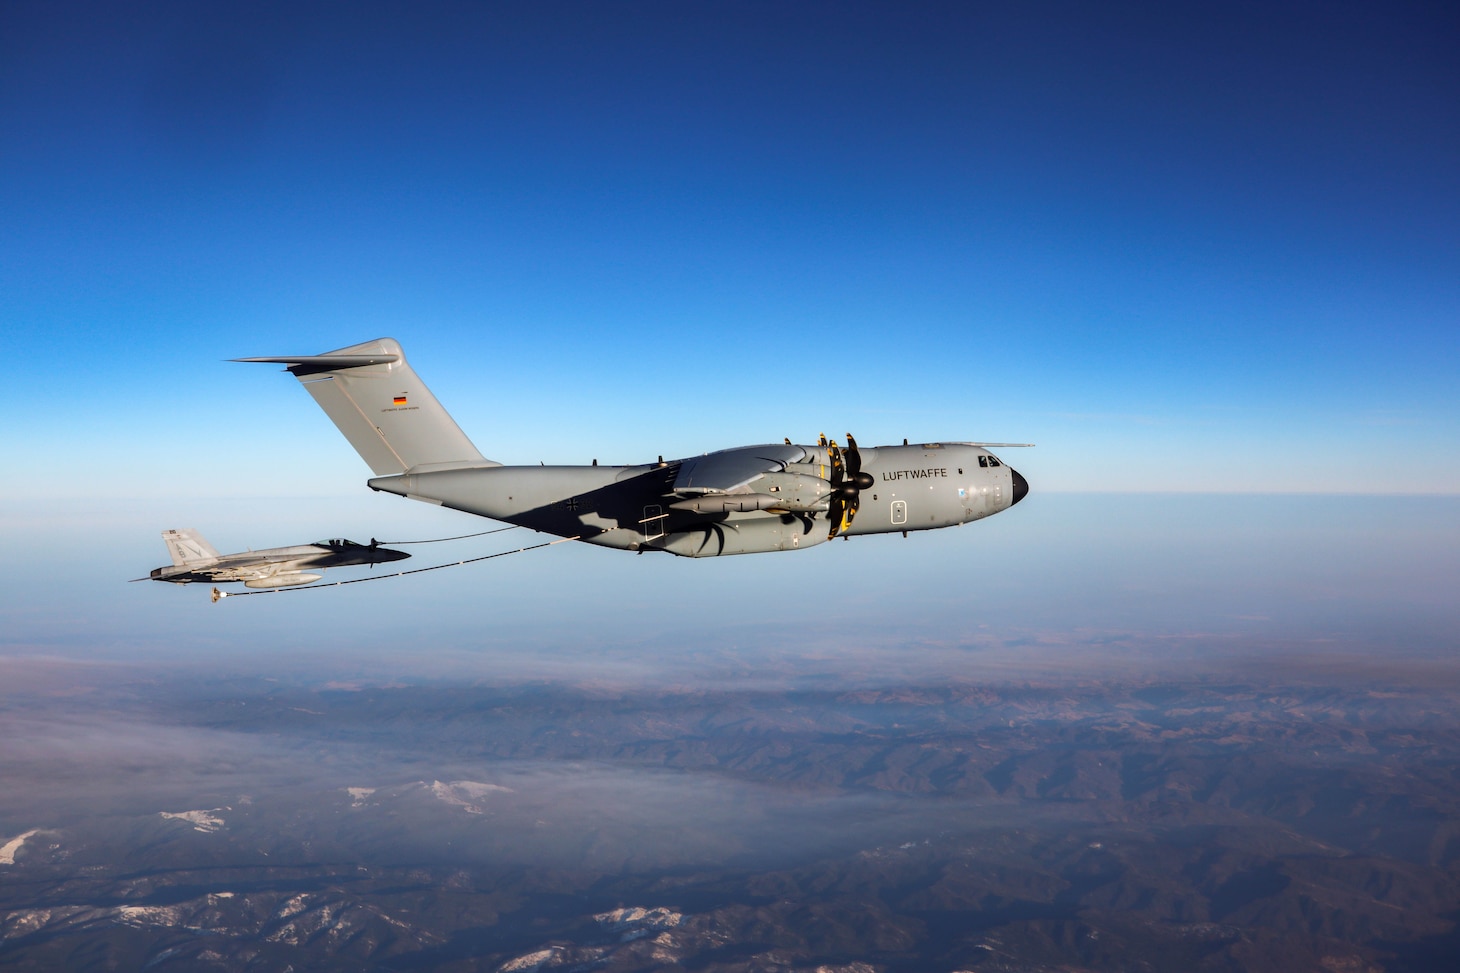 A German Air Force A400M Tanker refuels an F/A-18E Super Hornet, attached to the “Fighting Checkmates” of Strike Fighter Squadron (VFA) 211, Feb. 25, 2022.